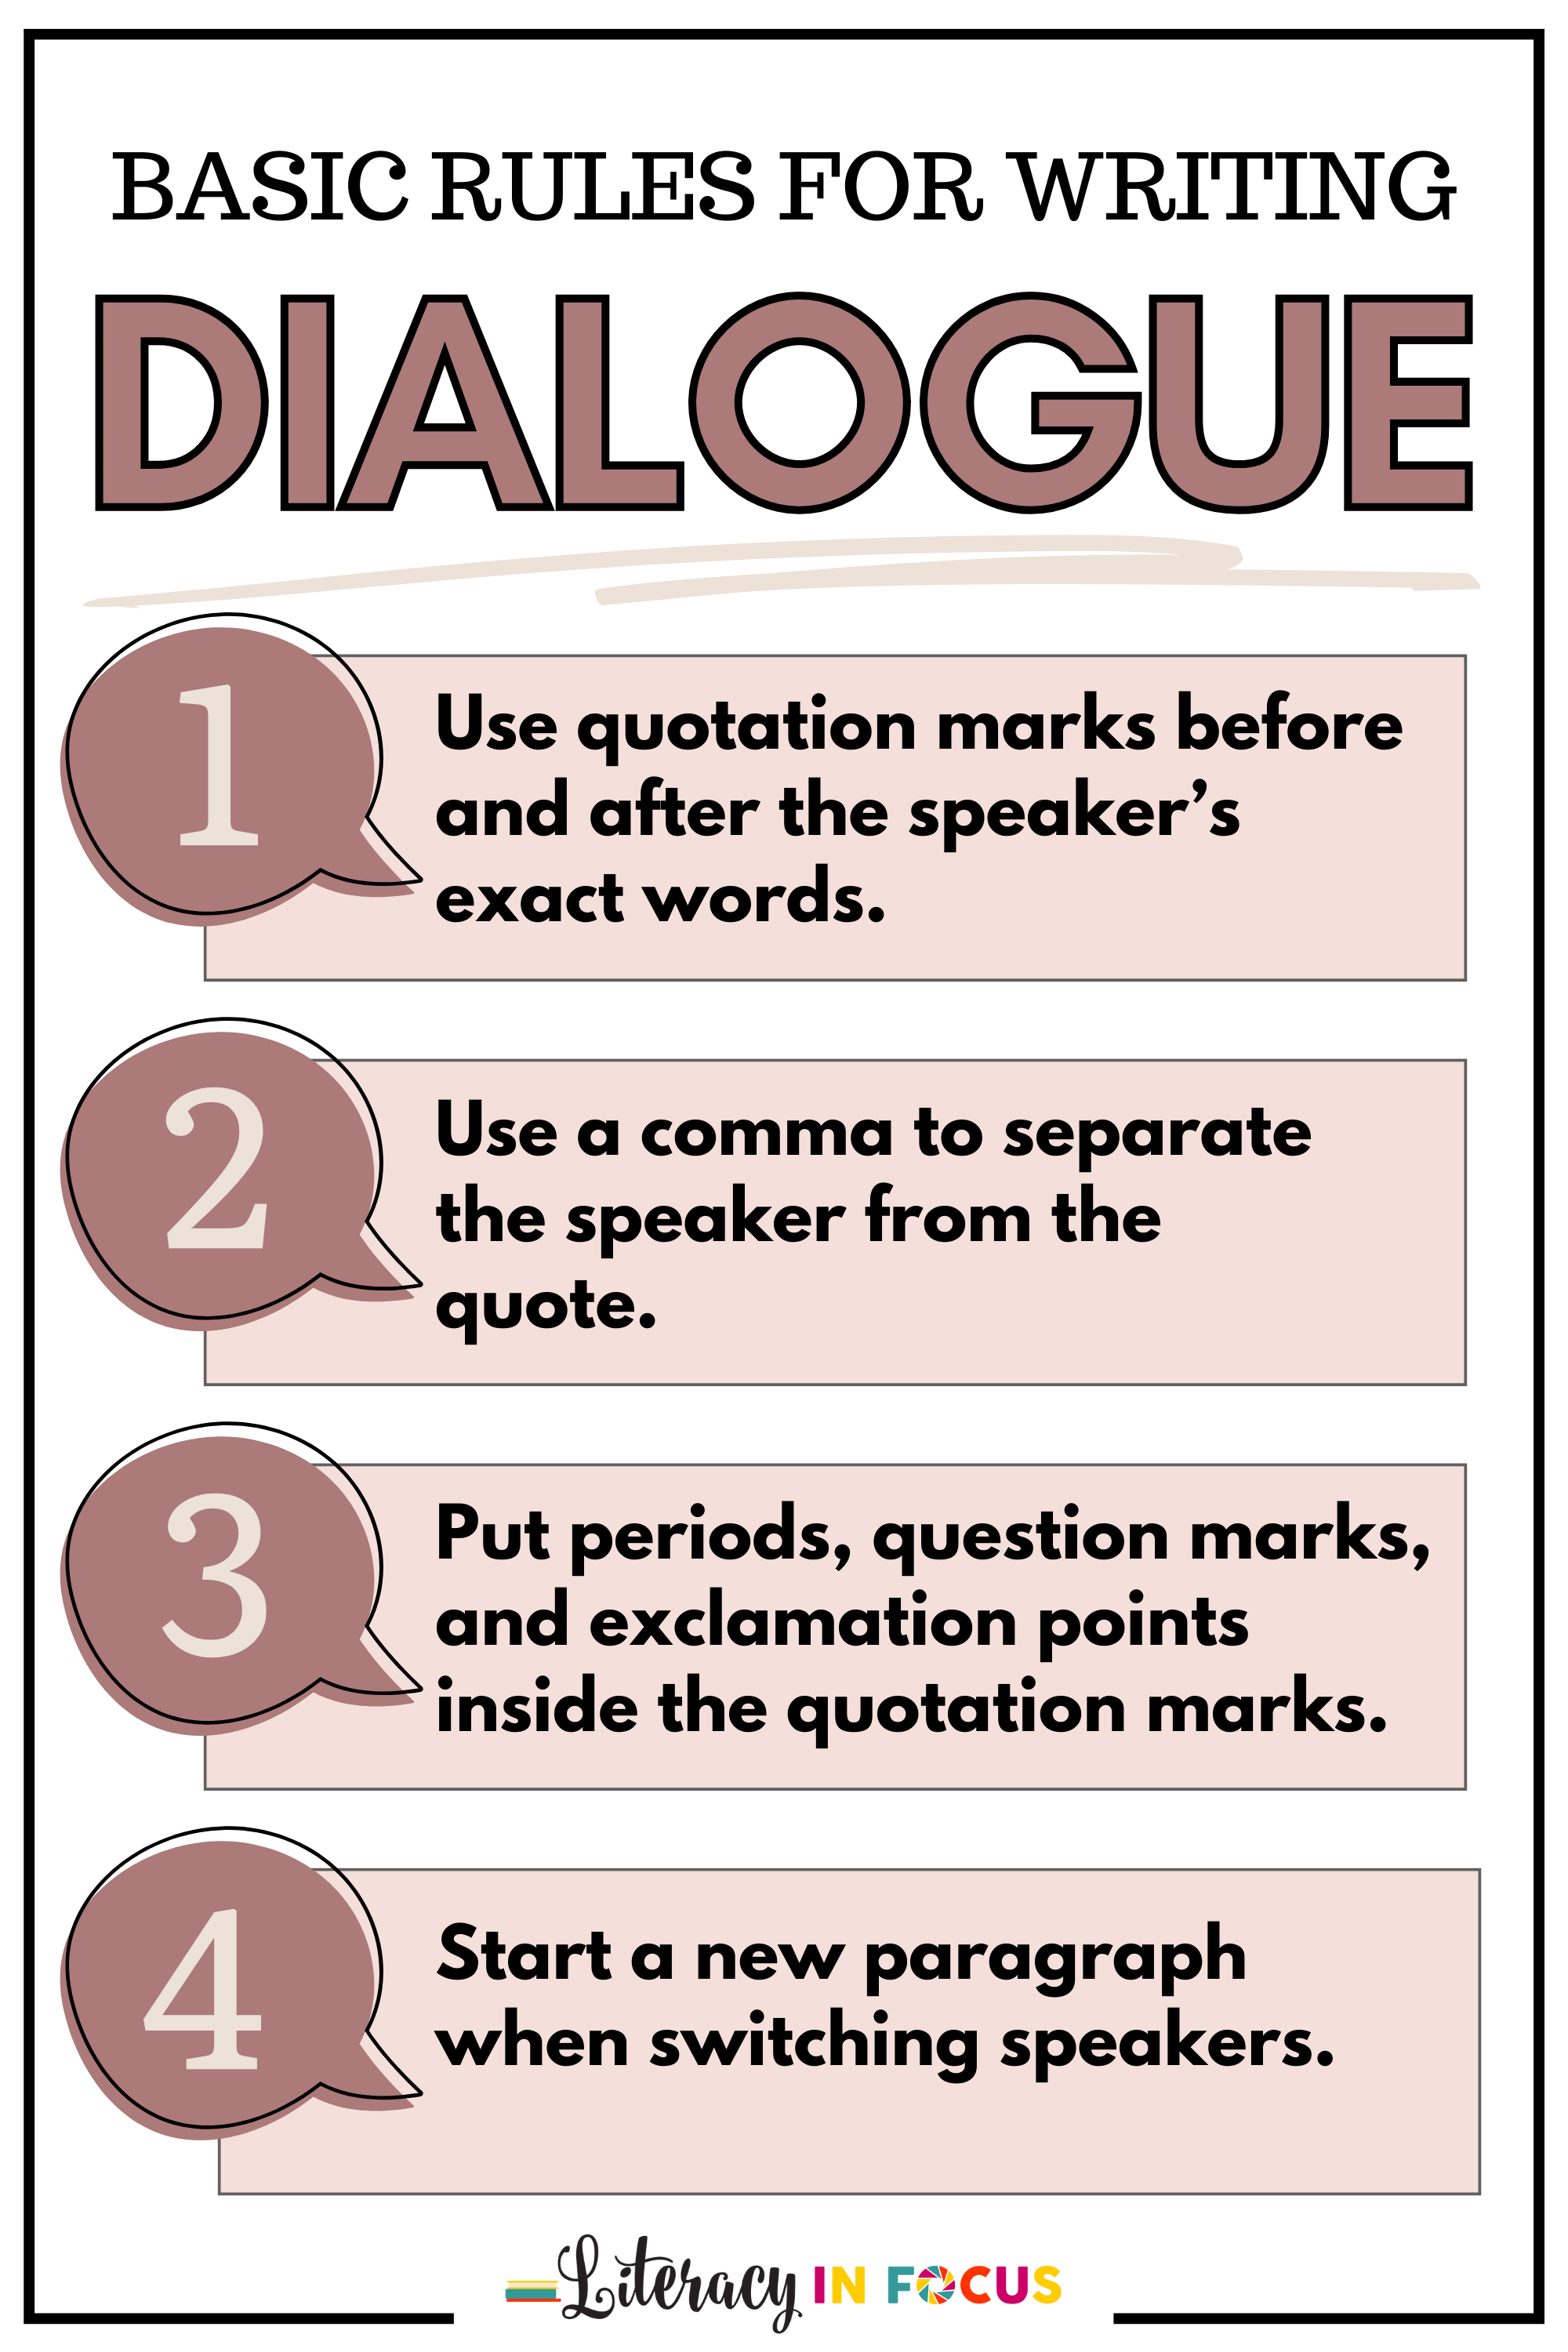 Rules for Writing Dialogue